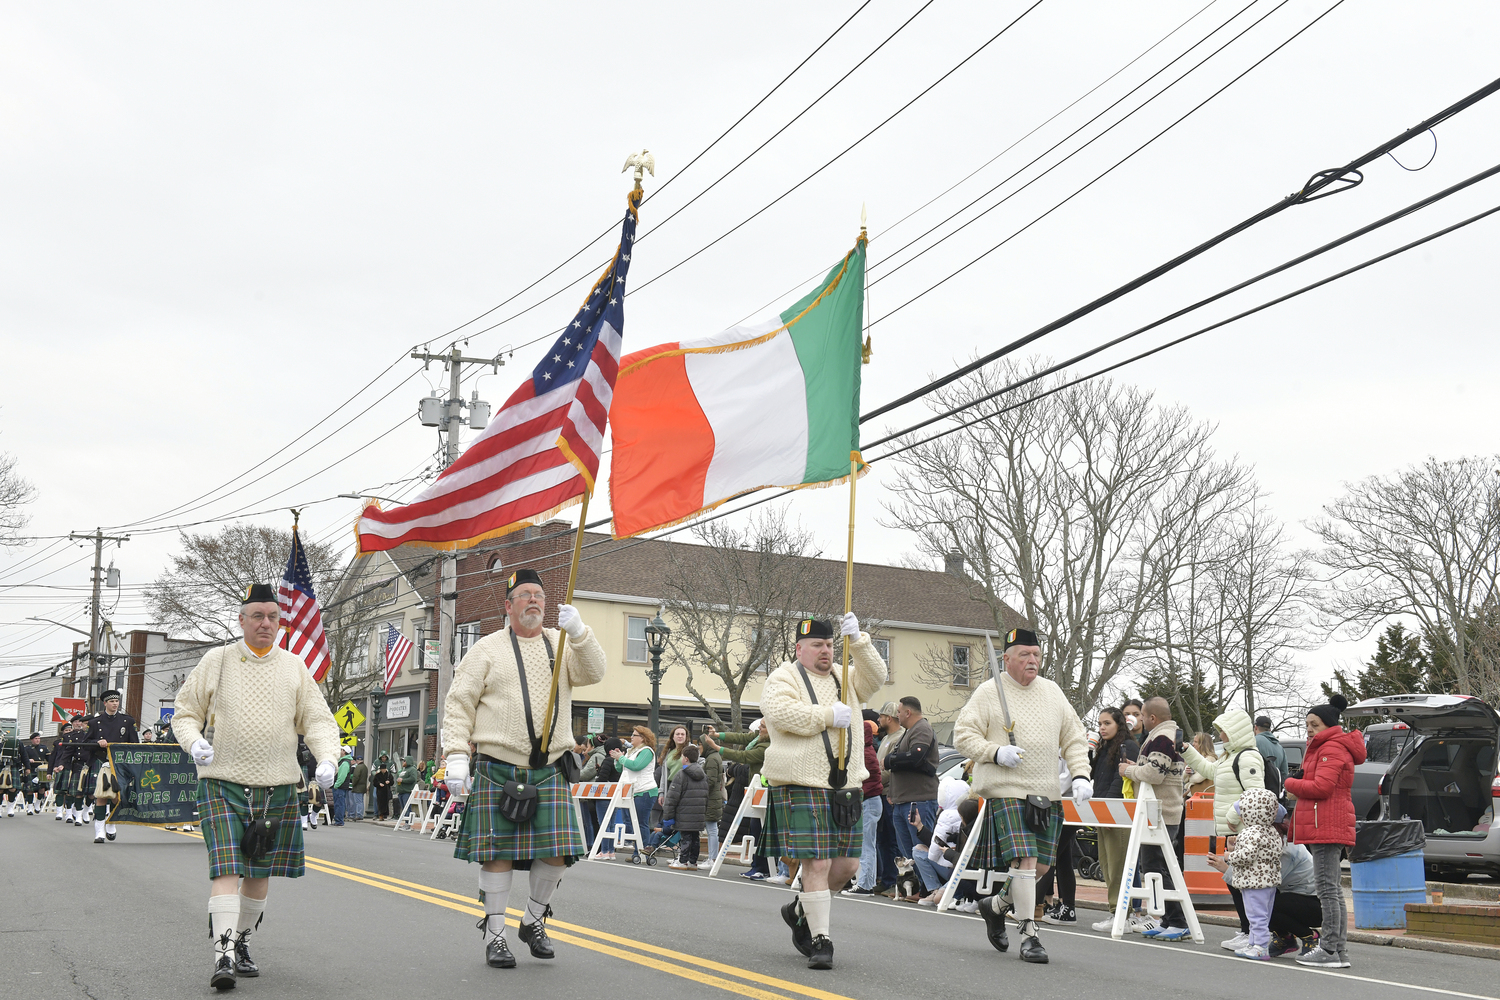 Hampton Bays St. Patrick's Day Parade Is Canceled for 2024, but Will Return in 2025 27 East